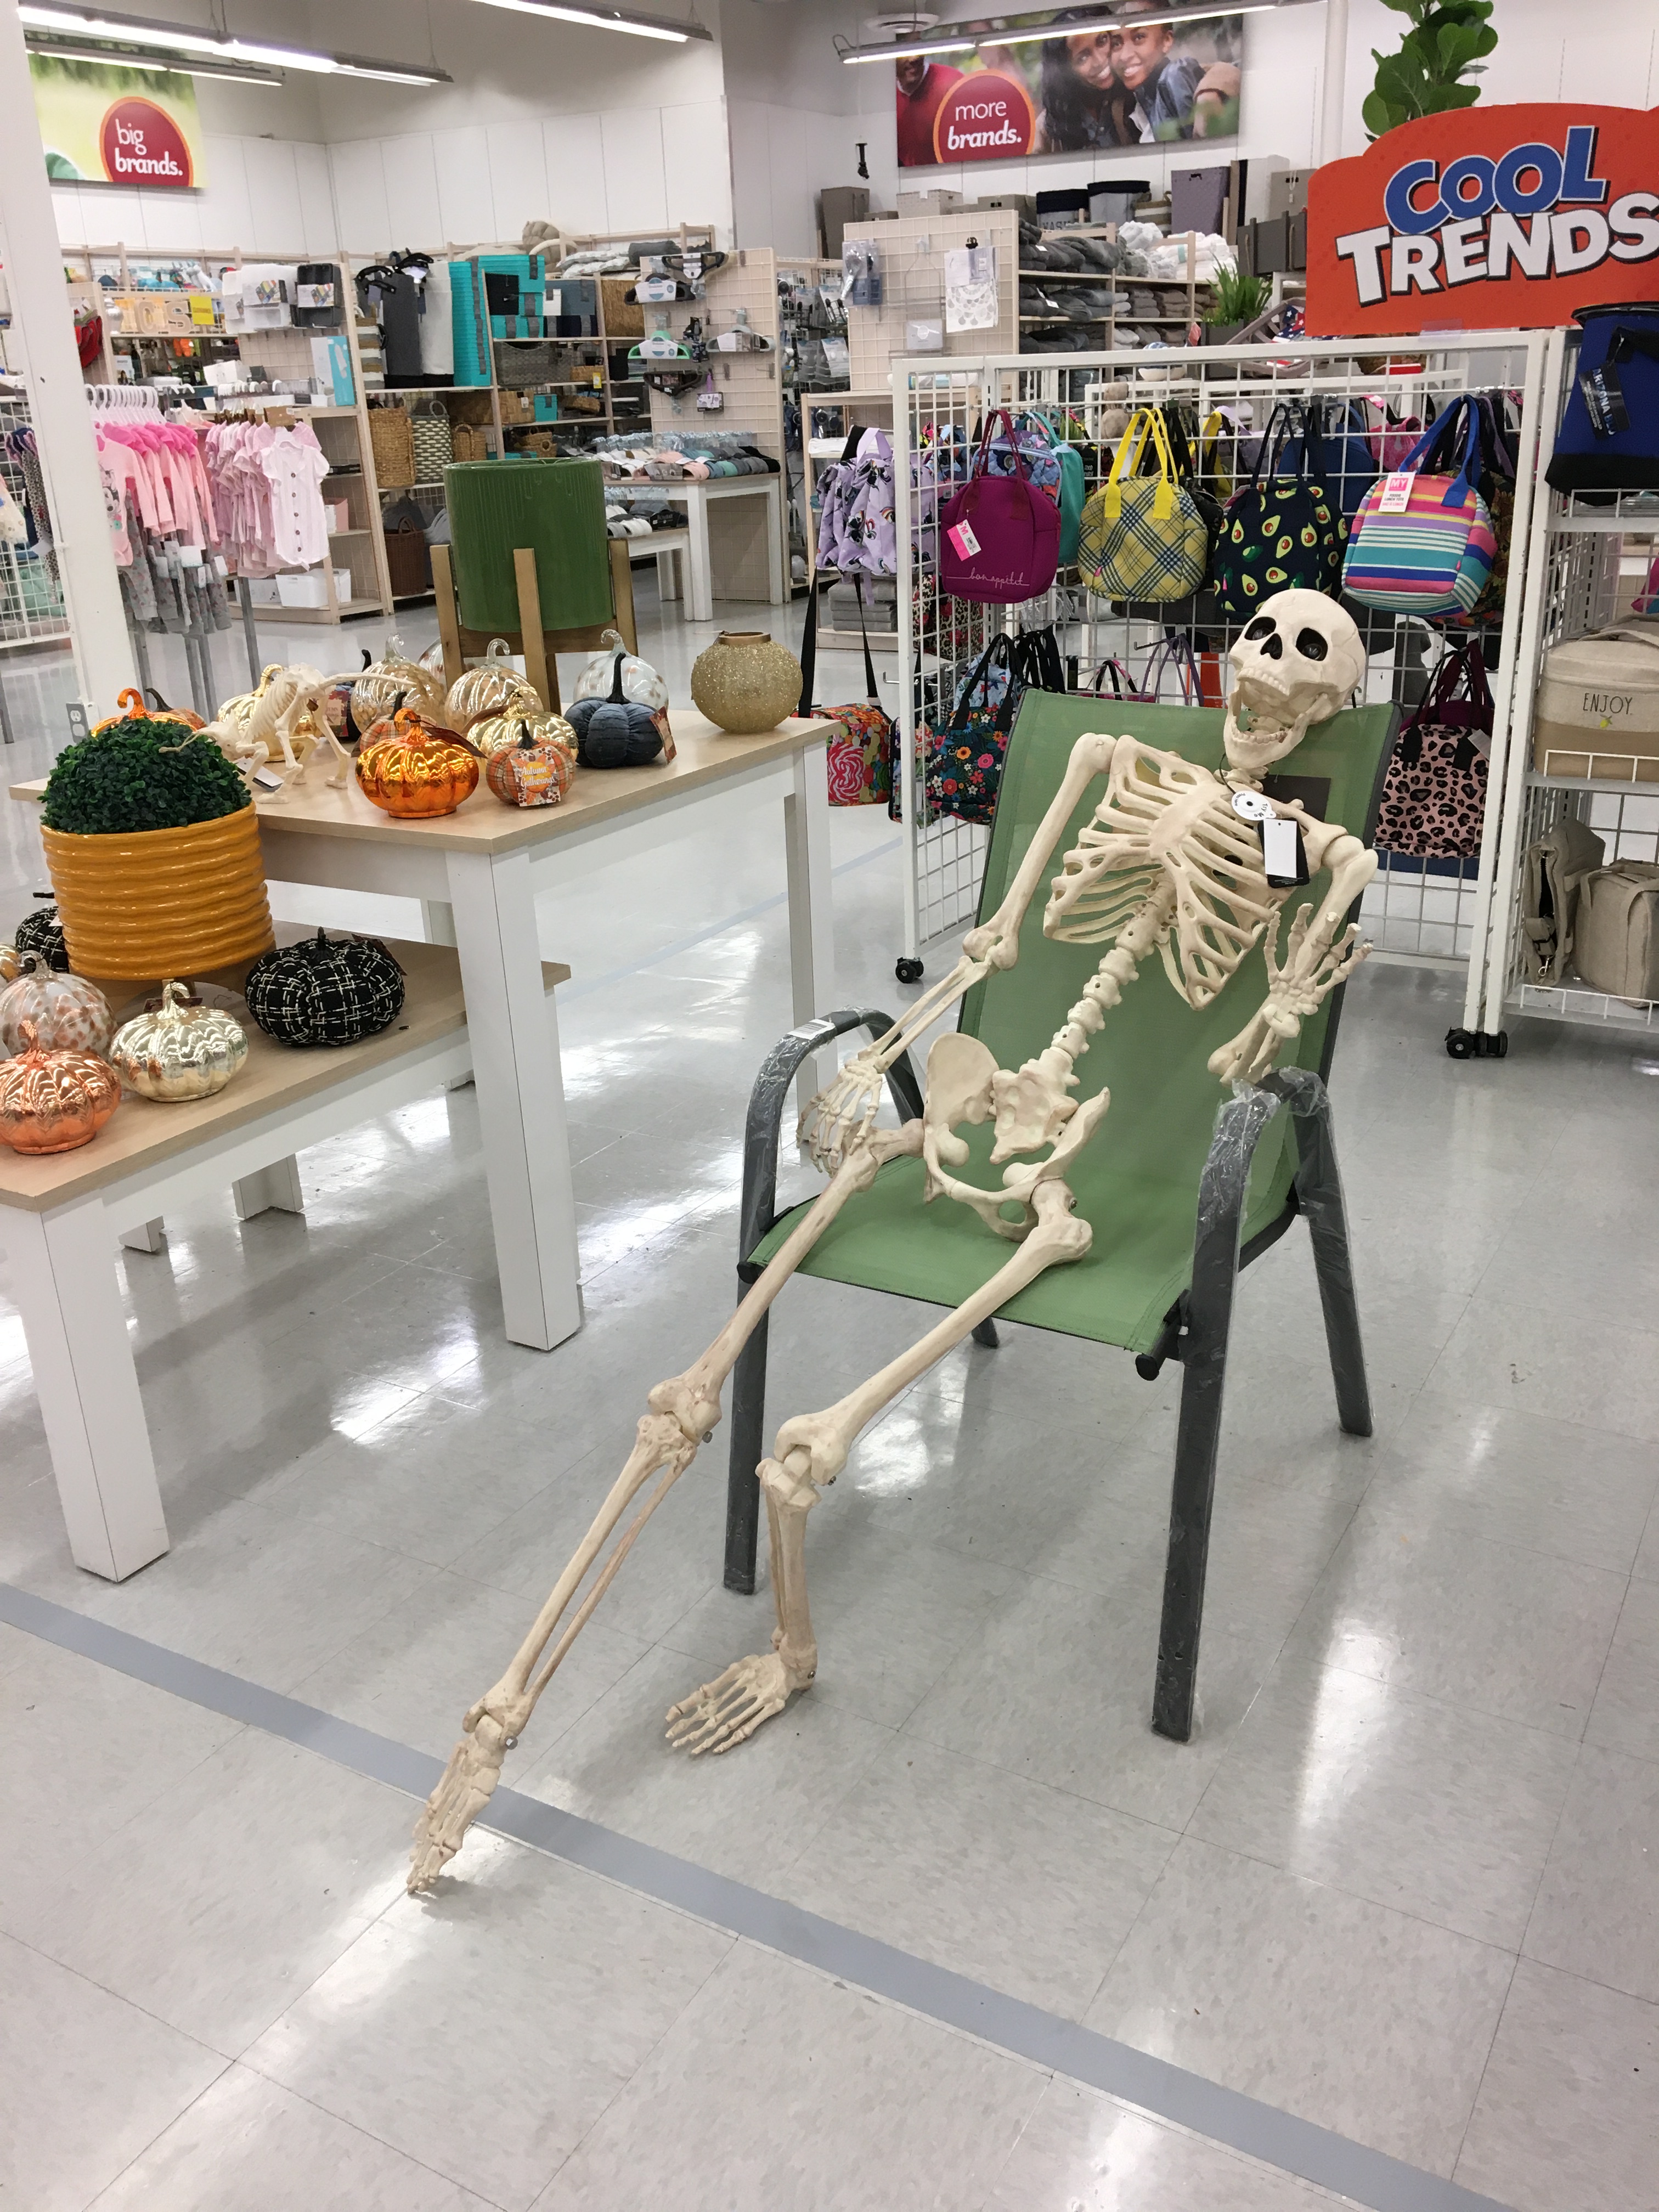 Skeleton sitting in back to school section of store.